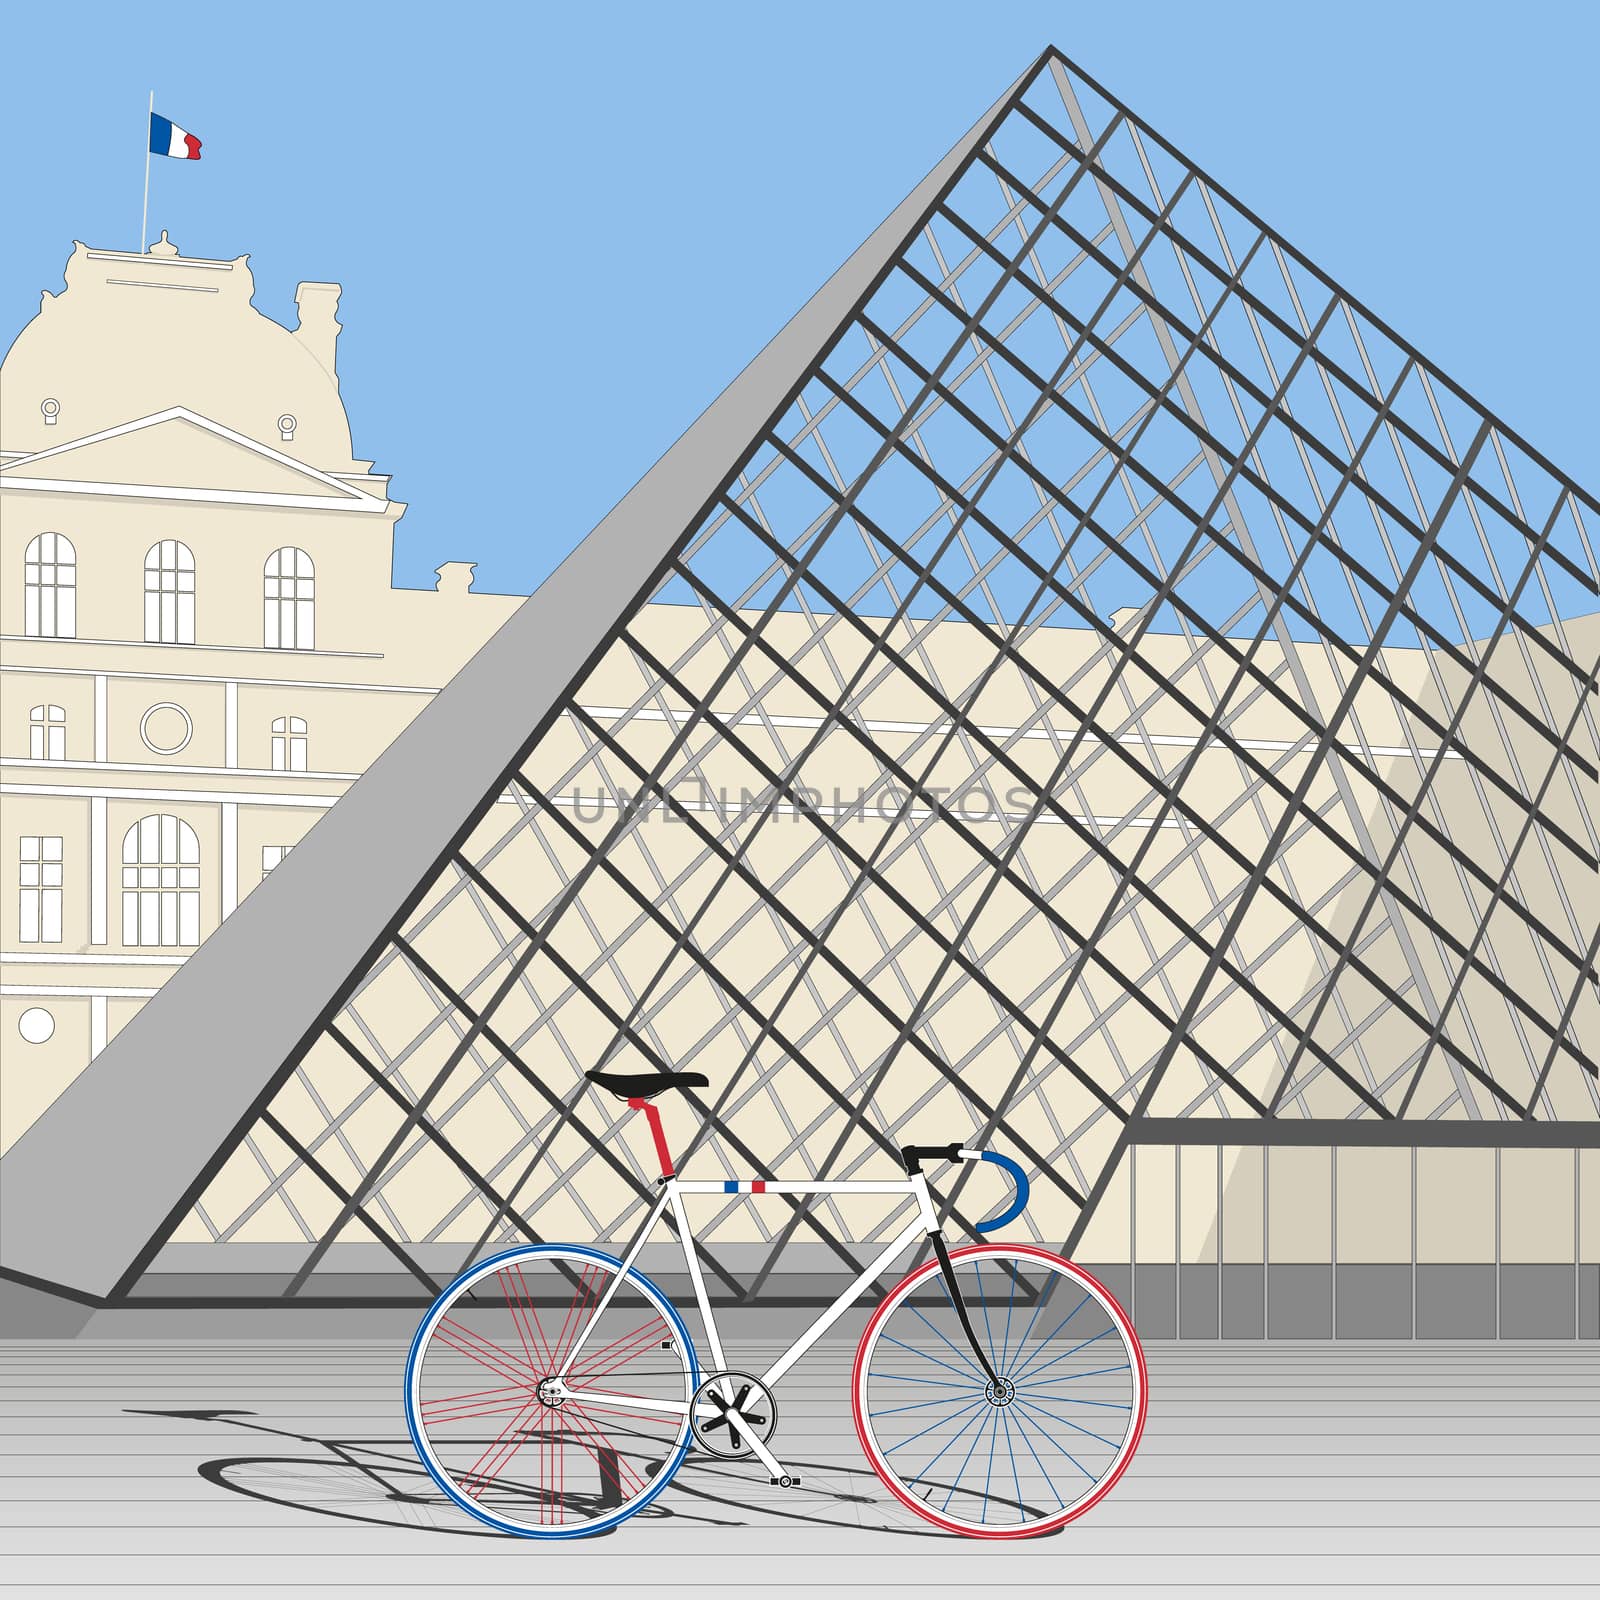 The road Bike painted with tricolor of France park at one of the most famous attractions of France.